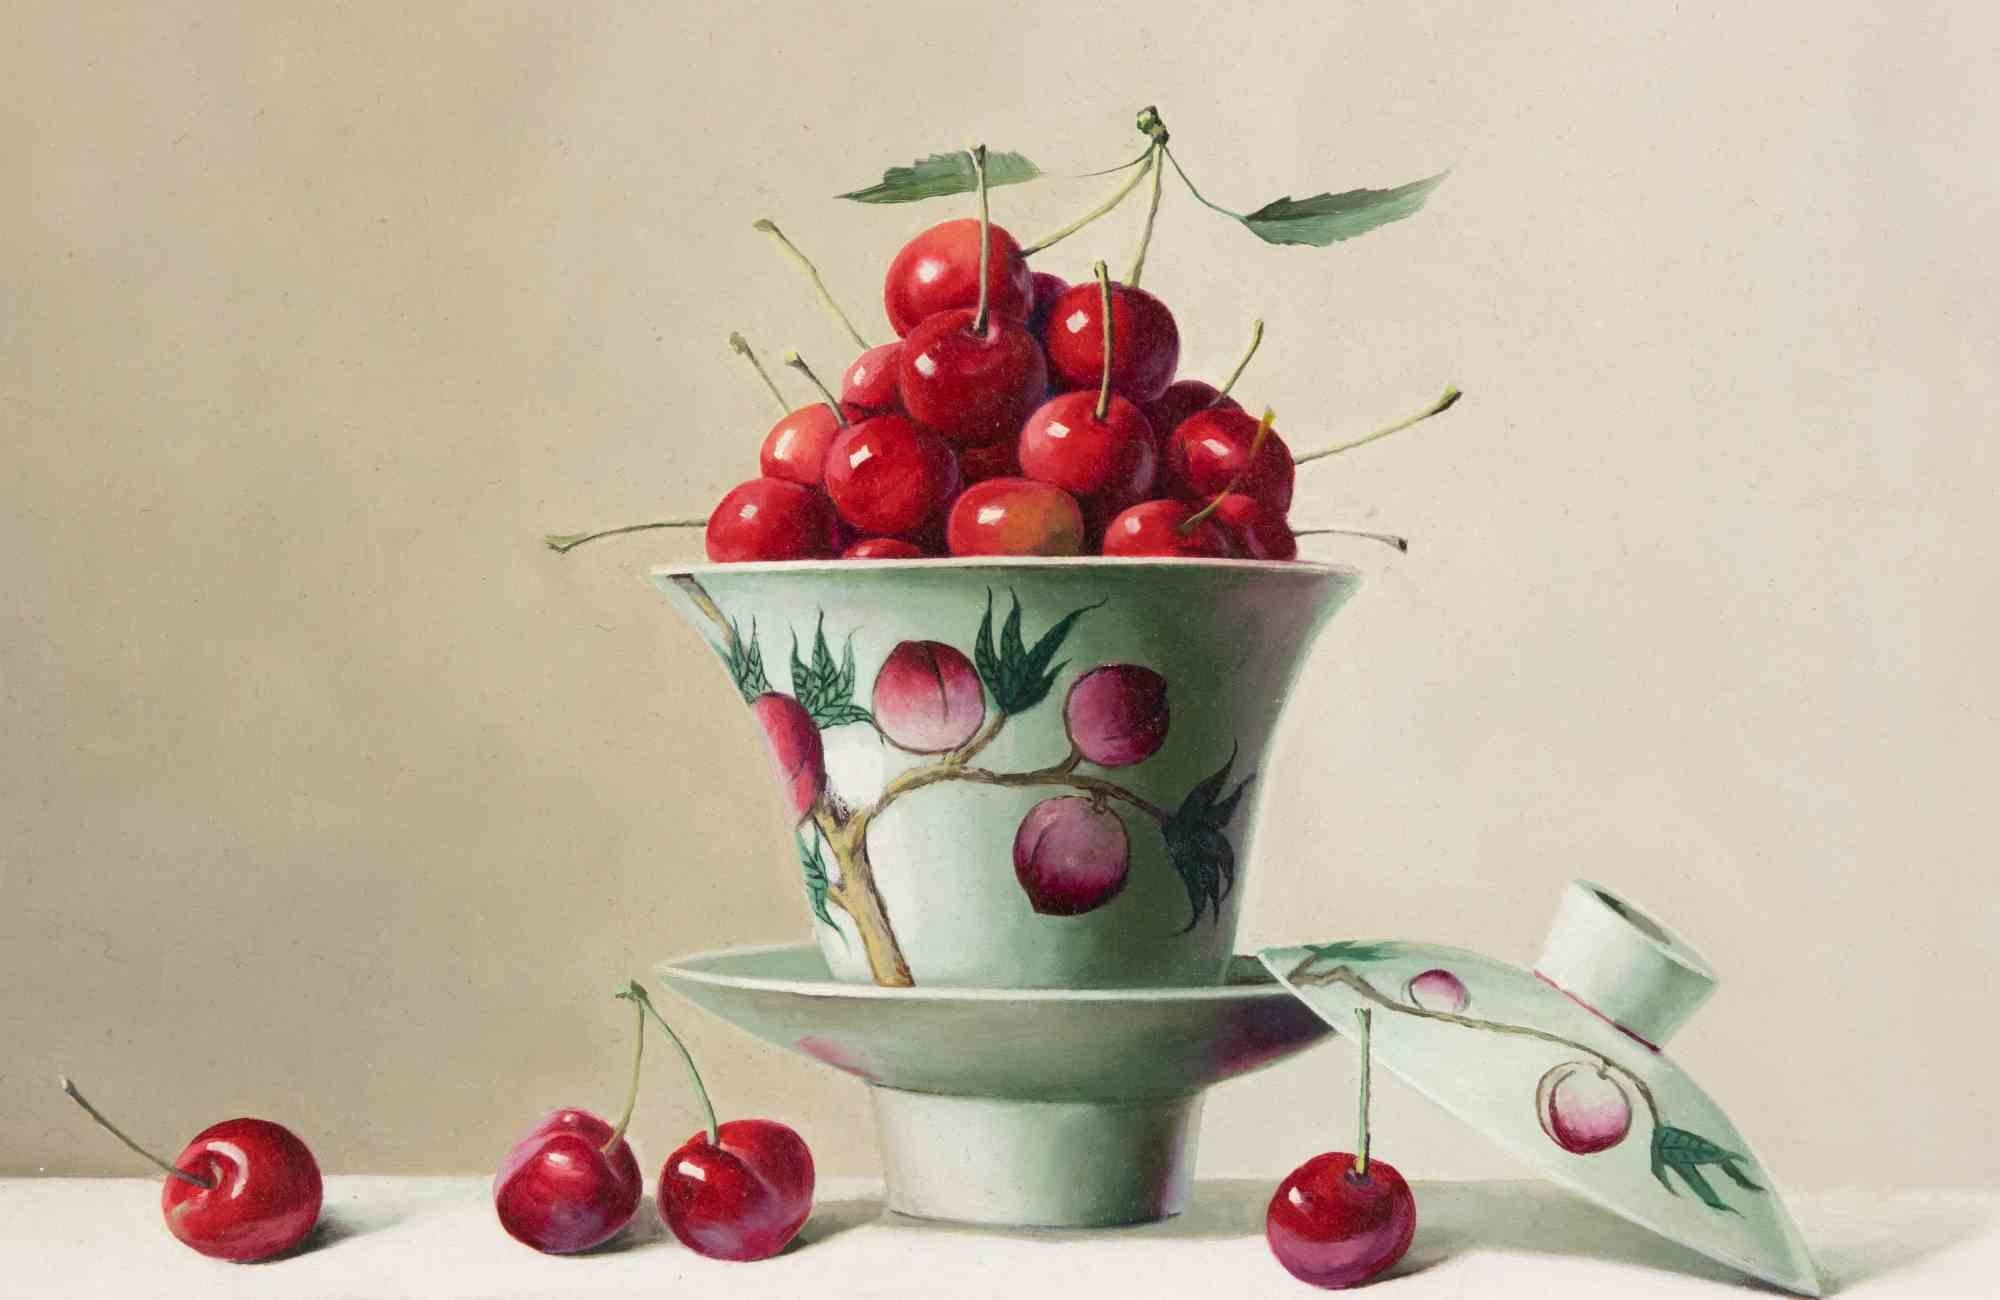 Cherries on Table  is an original oil painting realized by Zhang Wei Guang (Mirror) in 2007

Mixed colored oil on canvas

Includes frame
Hand-signed and dated on the back

Zhang Wei Guang , also called ‘mirror' was born in Helong Jang, China in